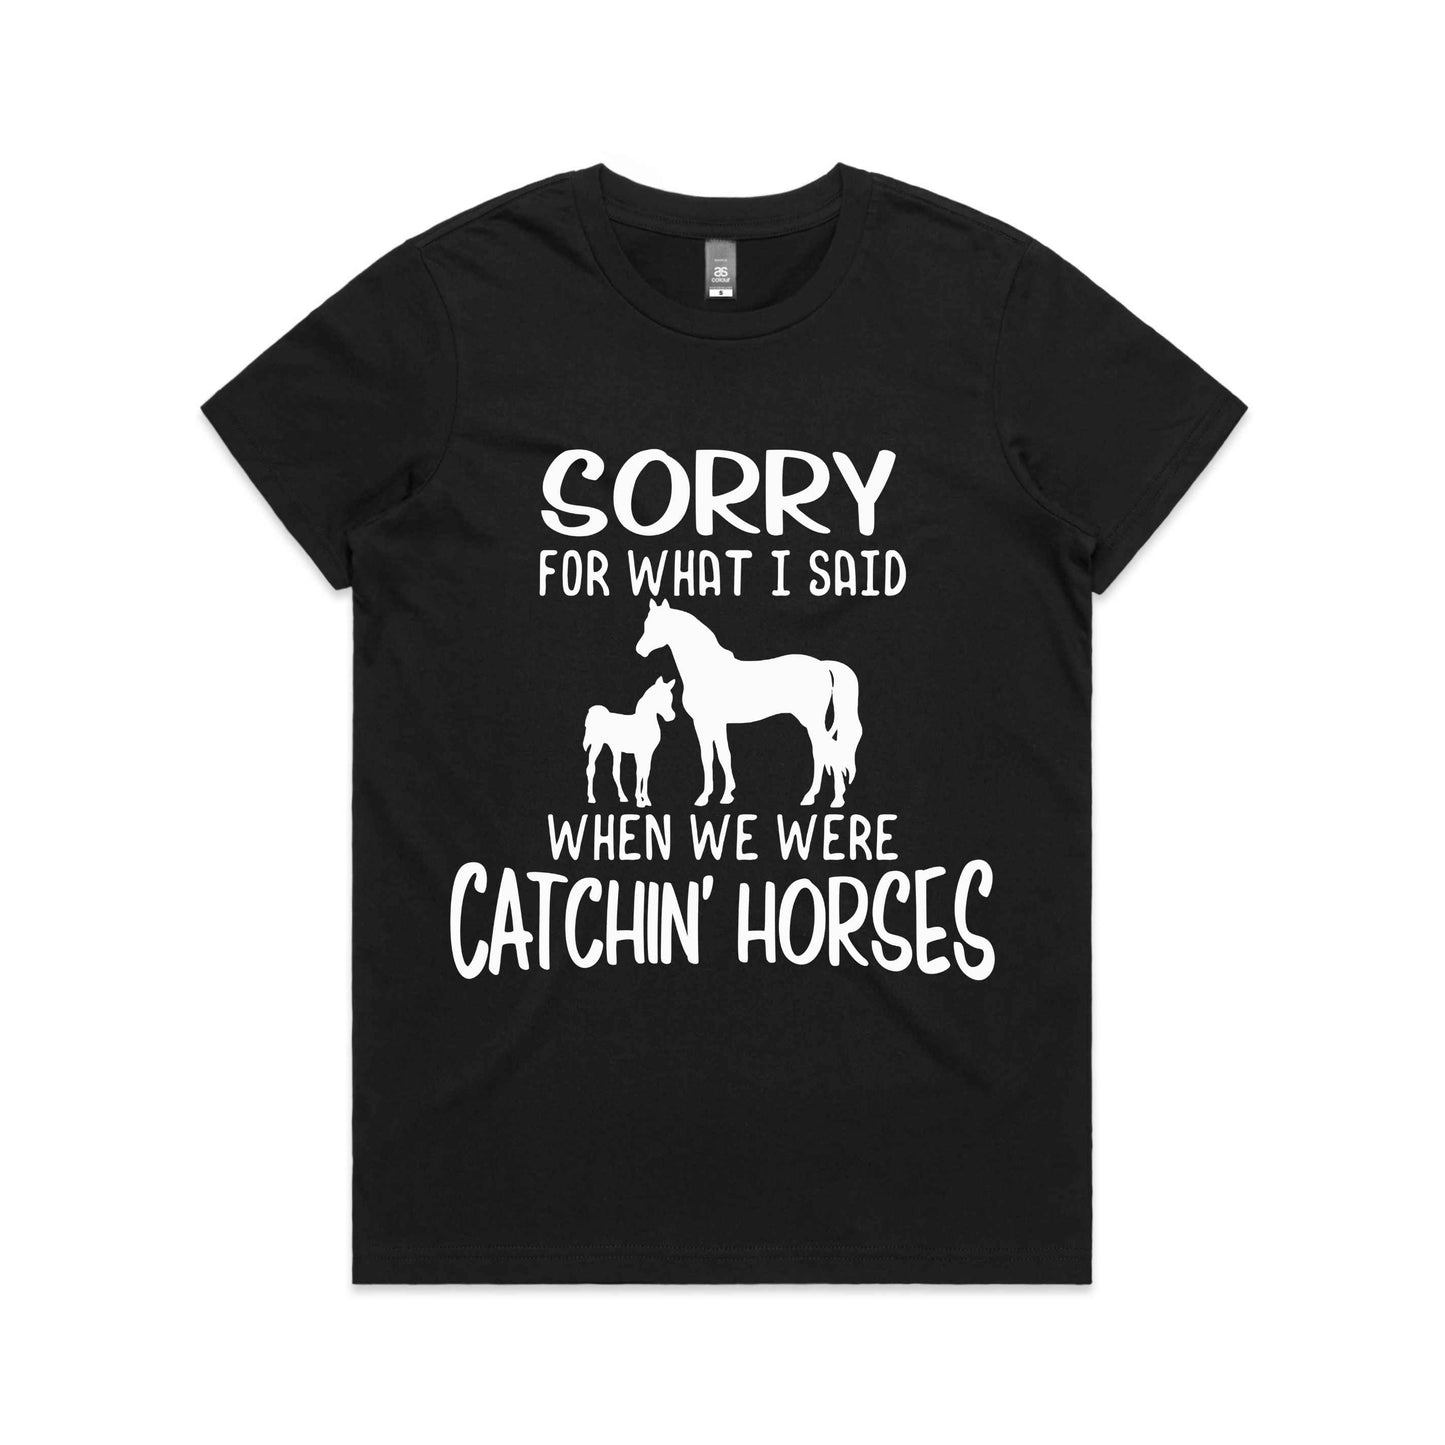 Hayco Women's Sorry for What I said When we were Catchn' Horses